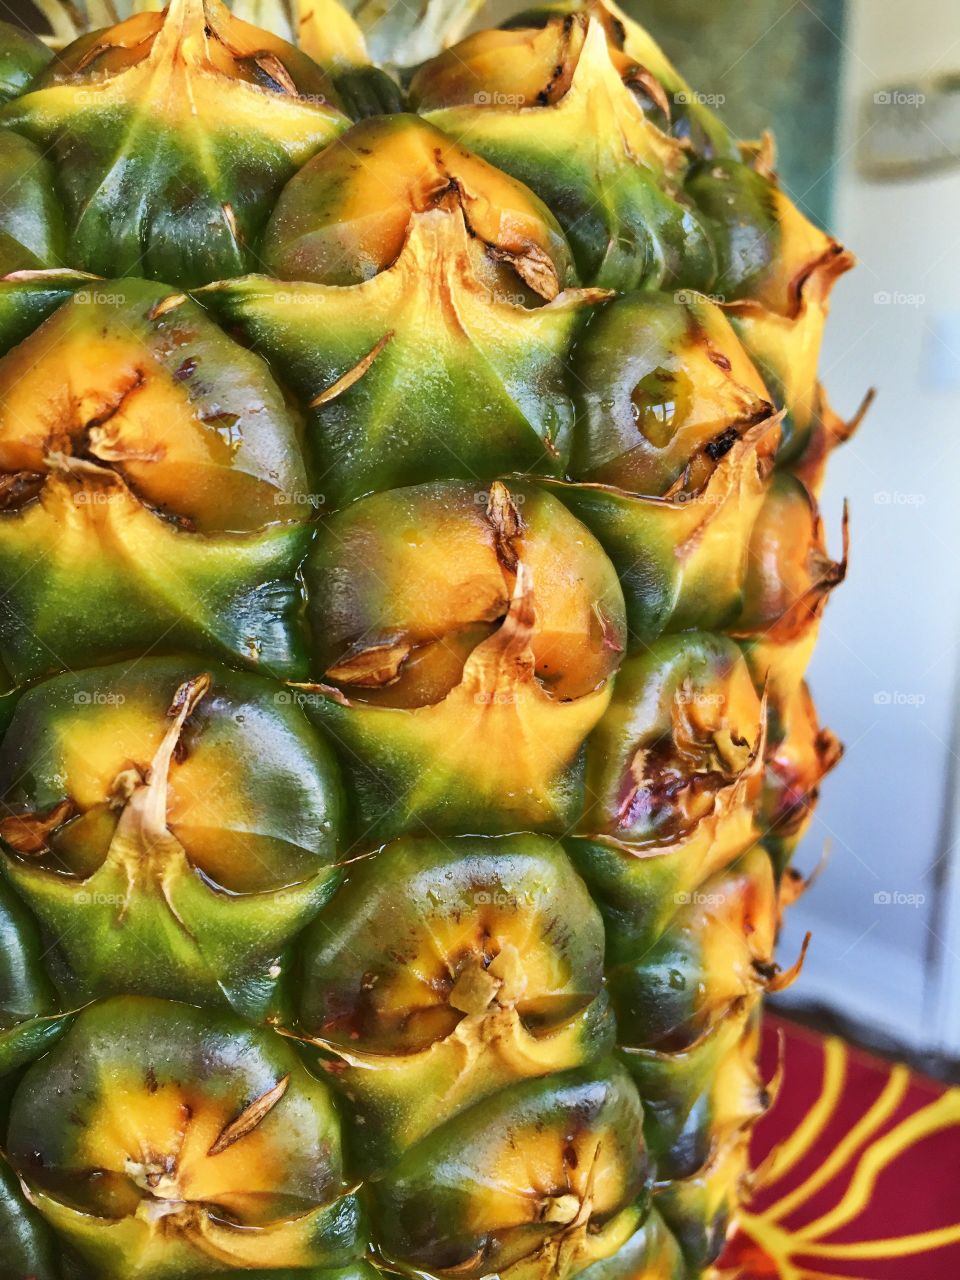 The side view of a pineapple